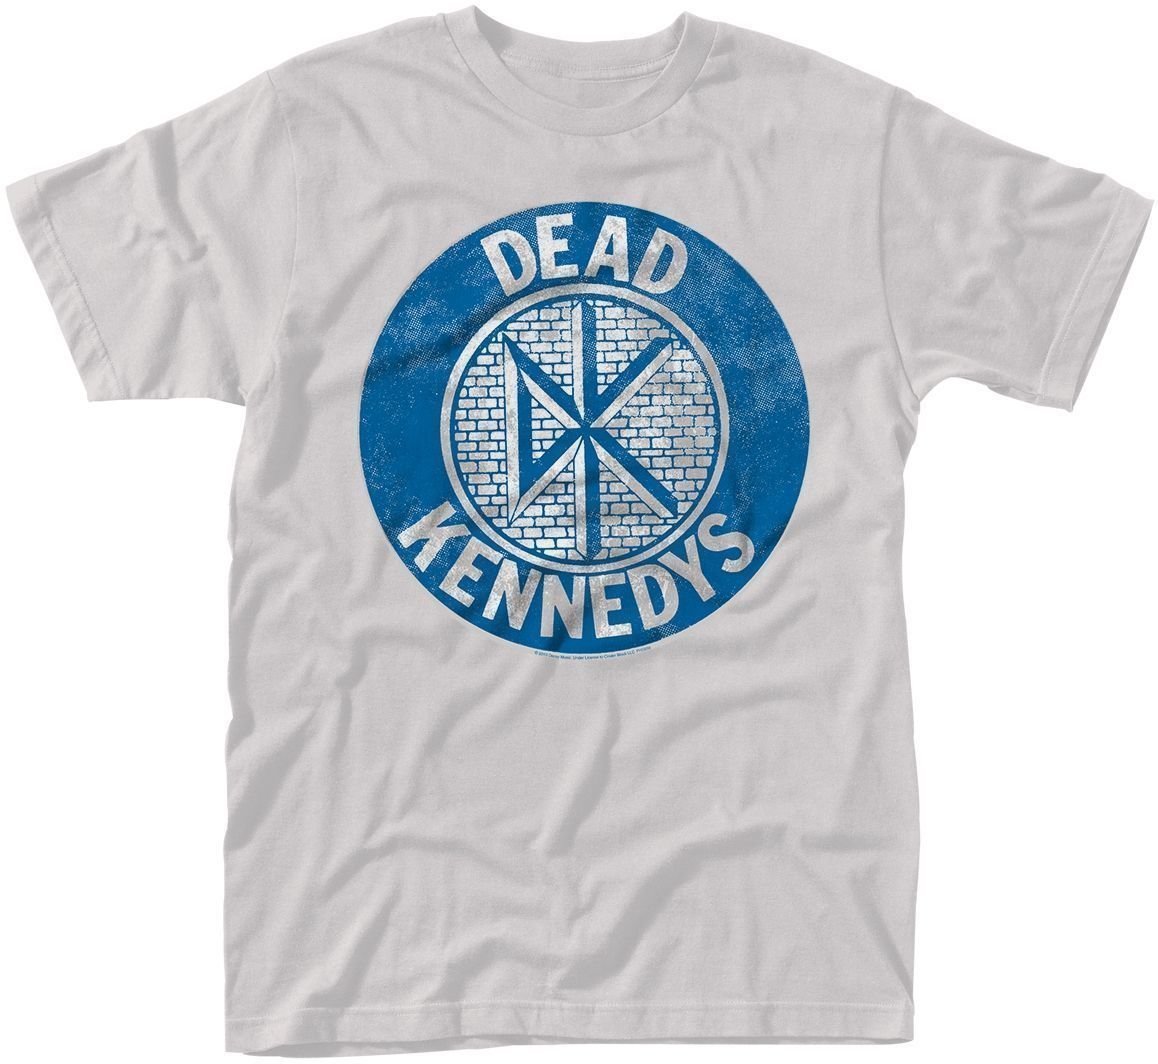 T-shirt Dead Kennedys T-shirt Bedtime For Democracy White M